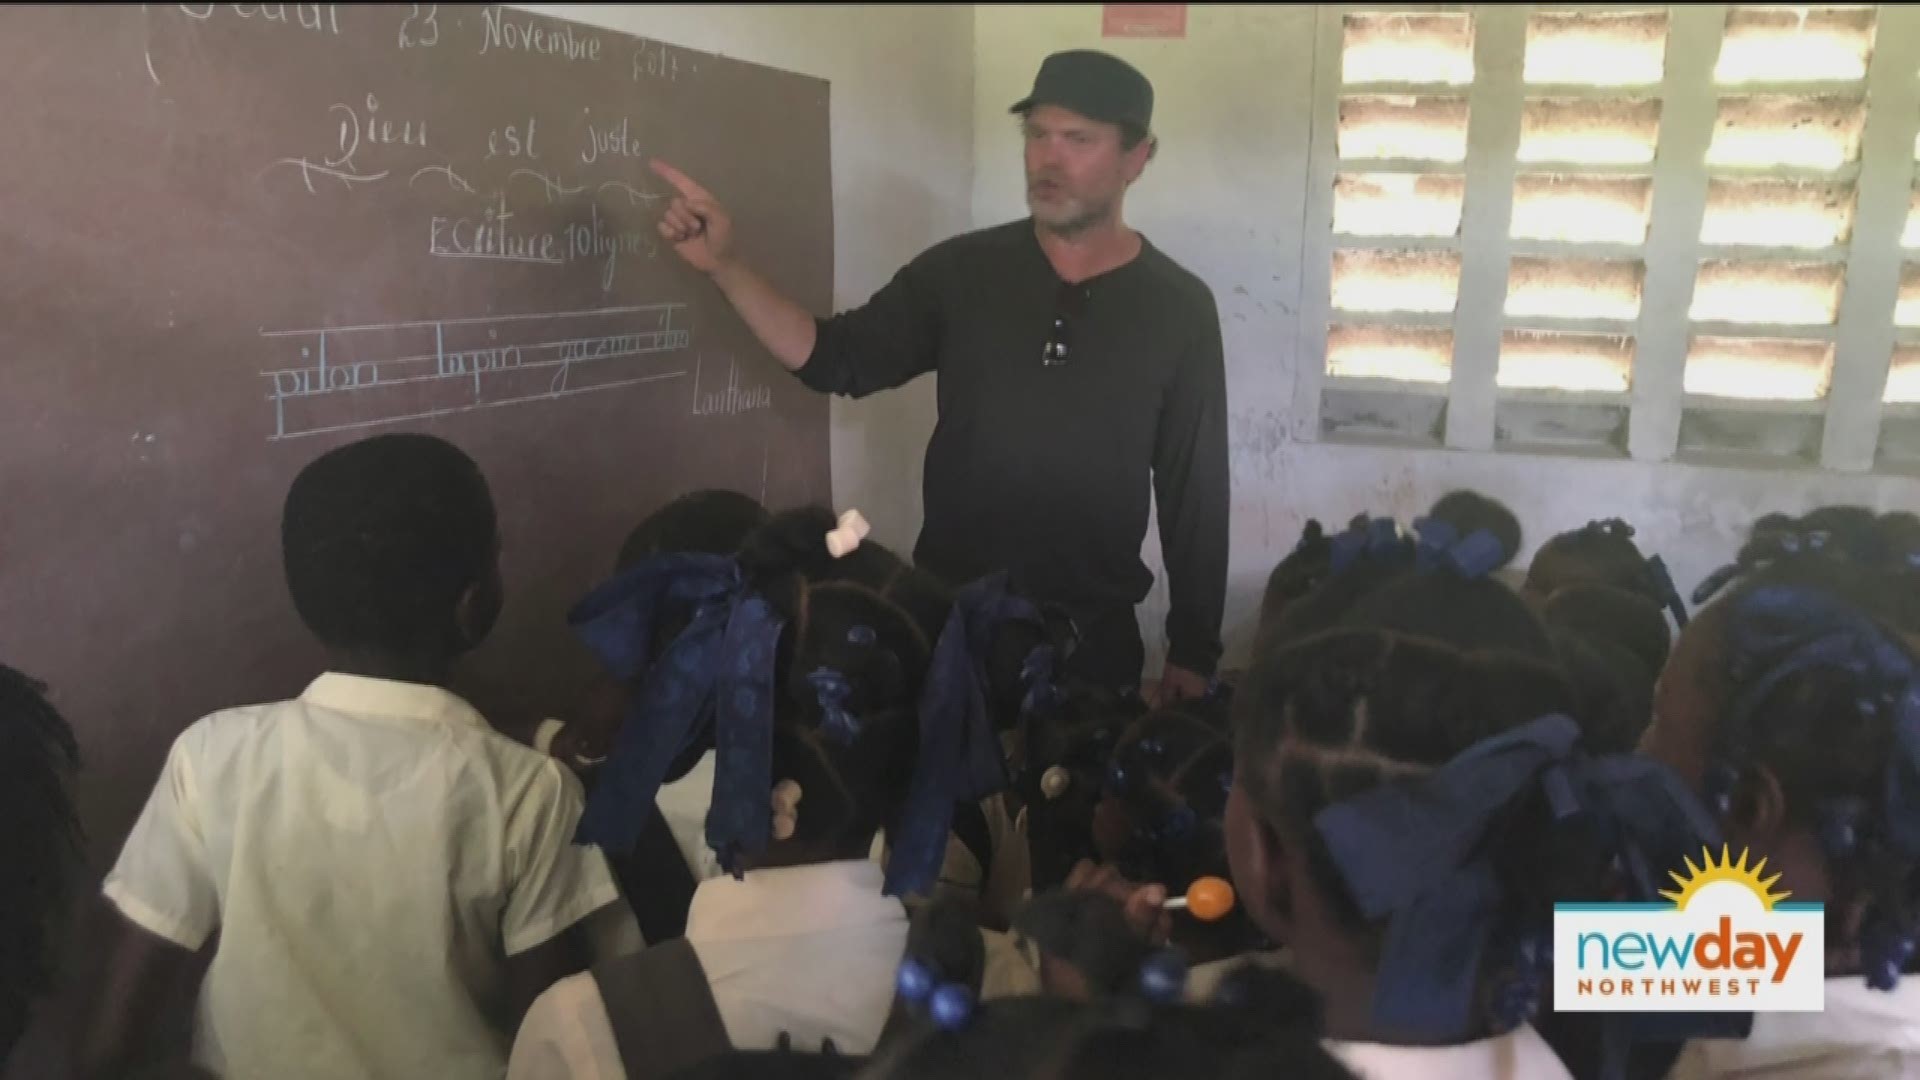 Actor, author, and philanthropist Rainn Wilson has teamed up with a local non-profit providing education and economic opportunities for women and children worldwide.